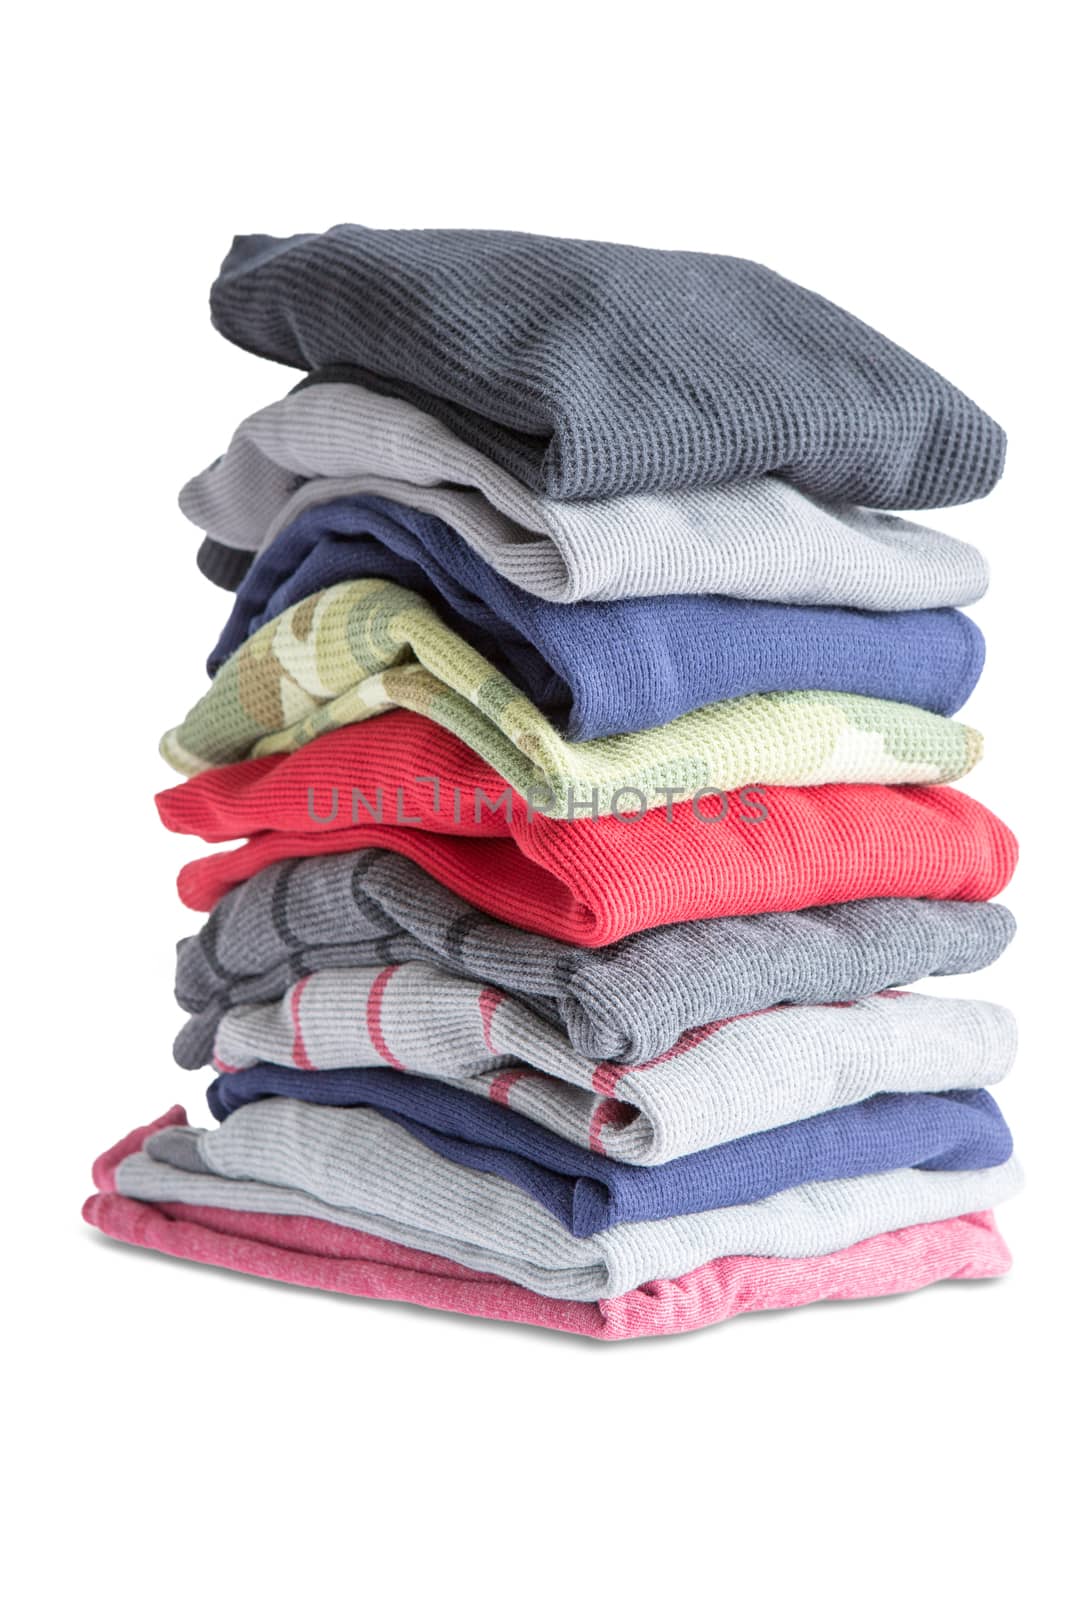 Close up Folded Assorted Clean Clothes in One Pile Isolated on White Background